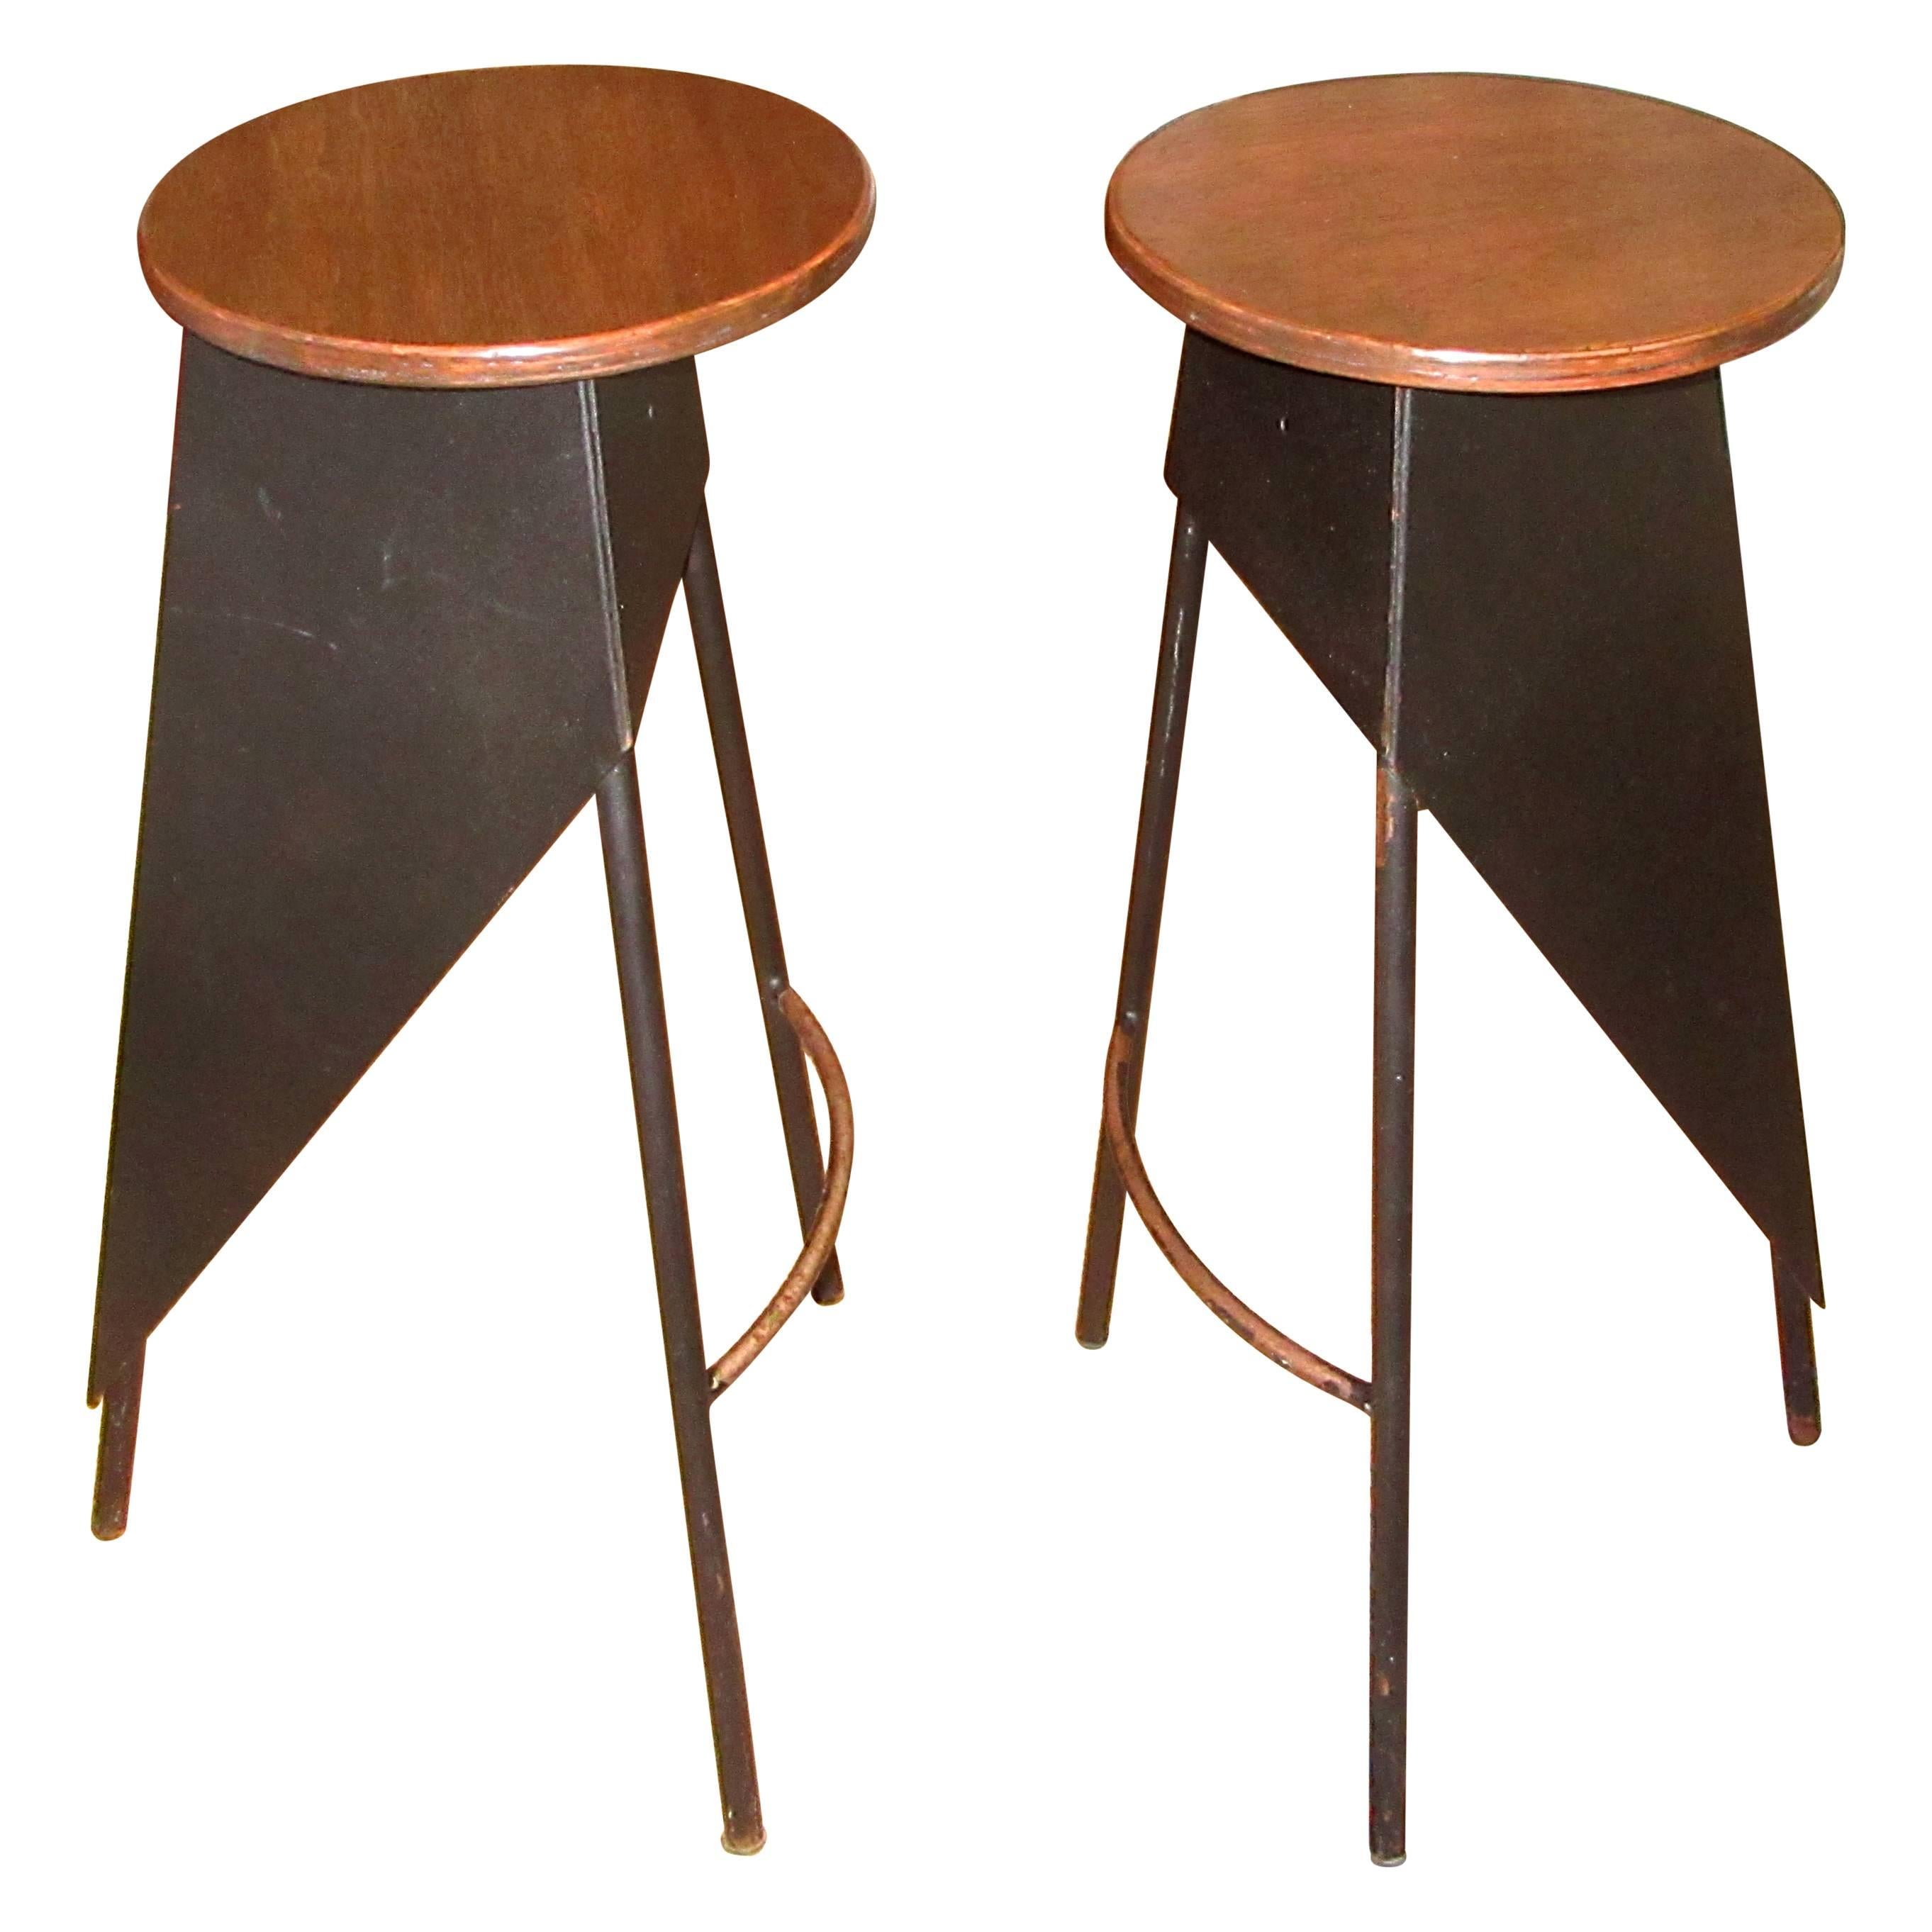 Pair of French Industrial Metal and Wood Stools